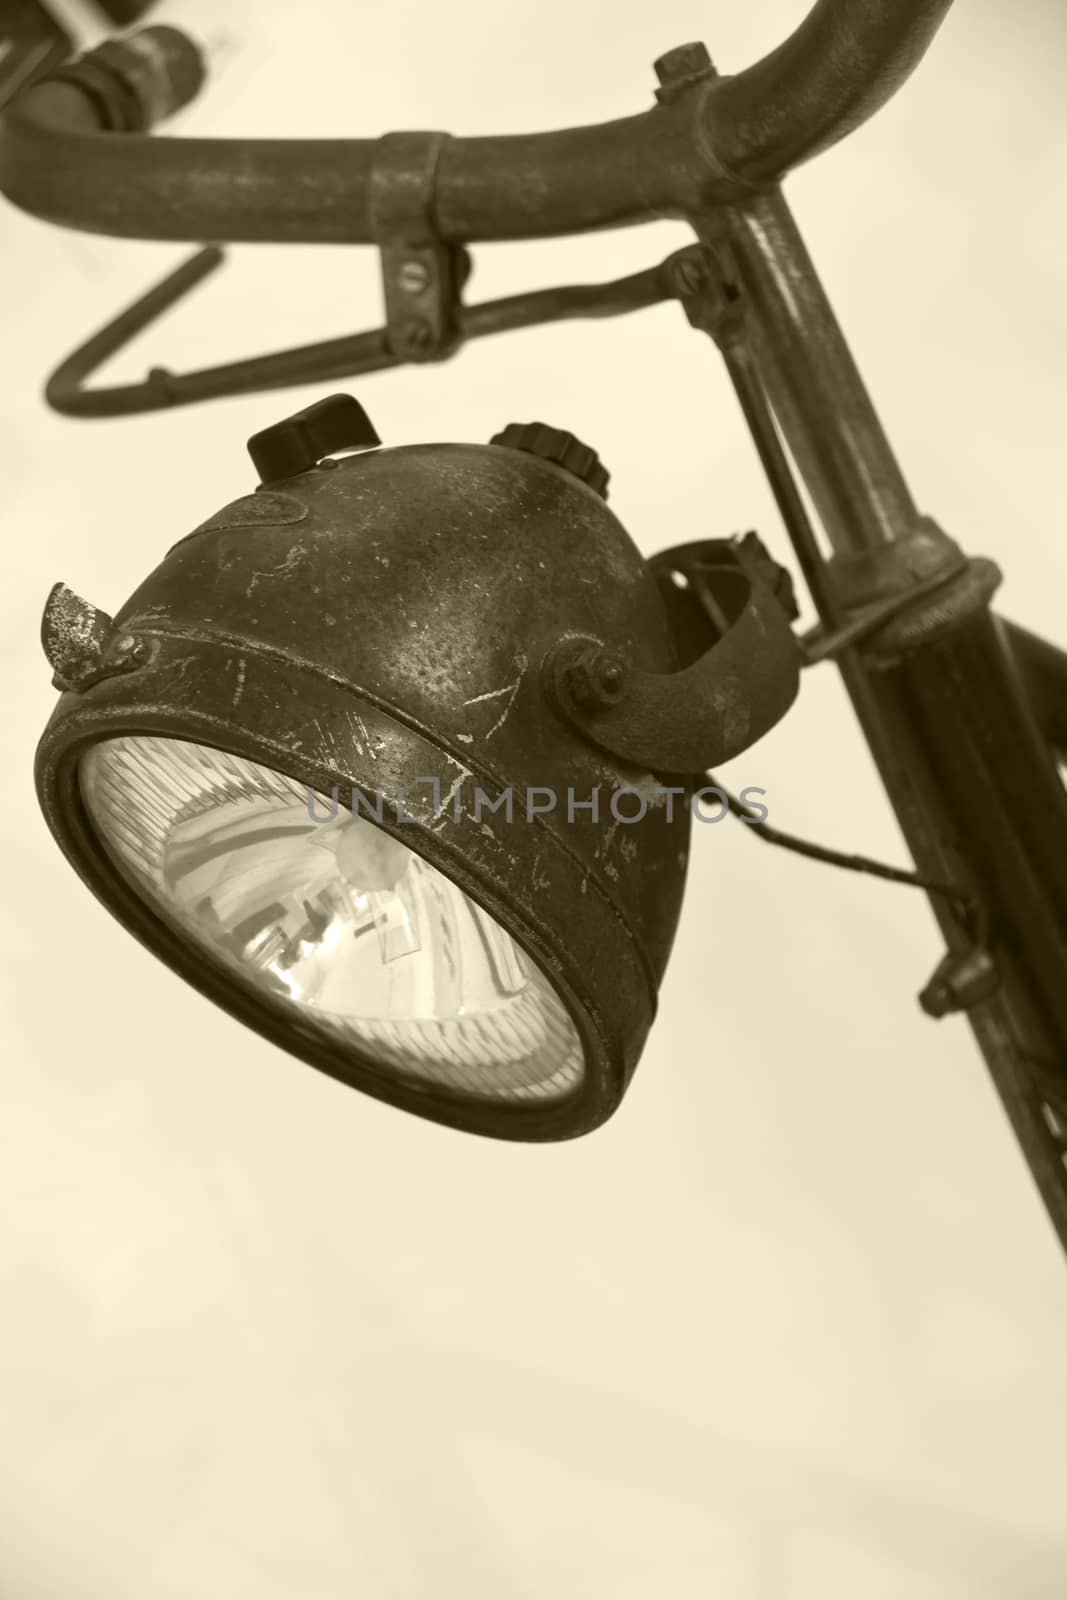 The lamp of an old bike.